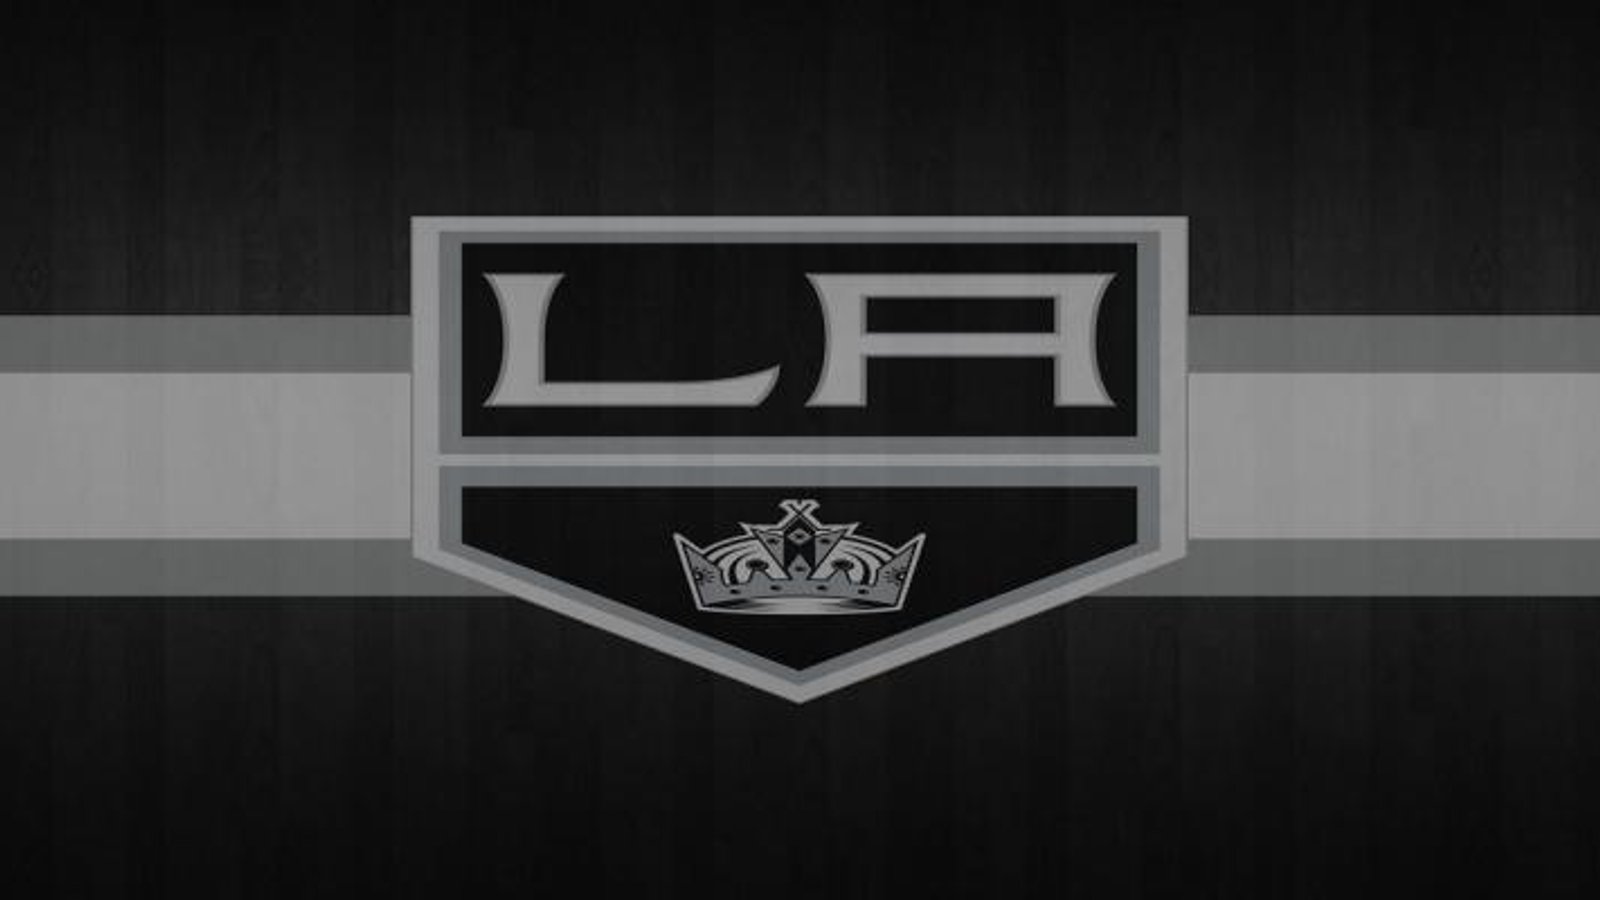 1st place on the line as Kings face the Ducks tonight